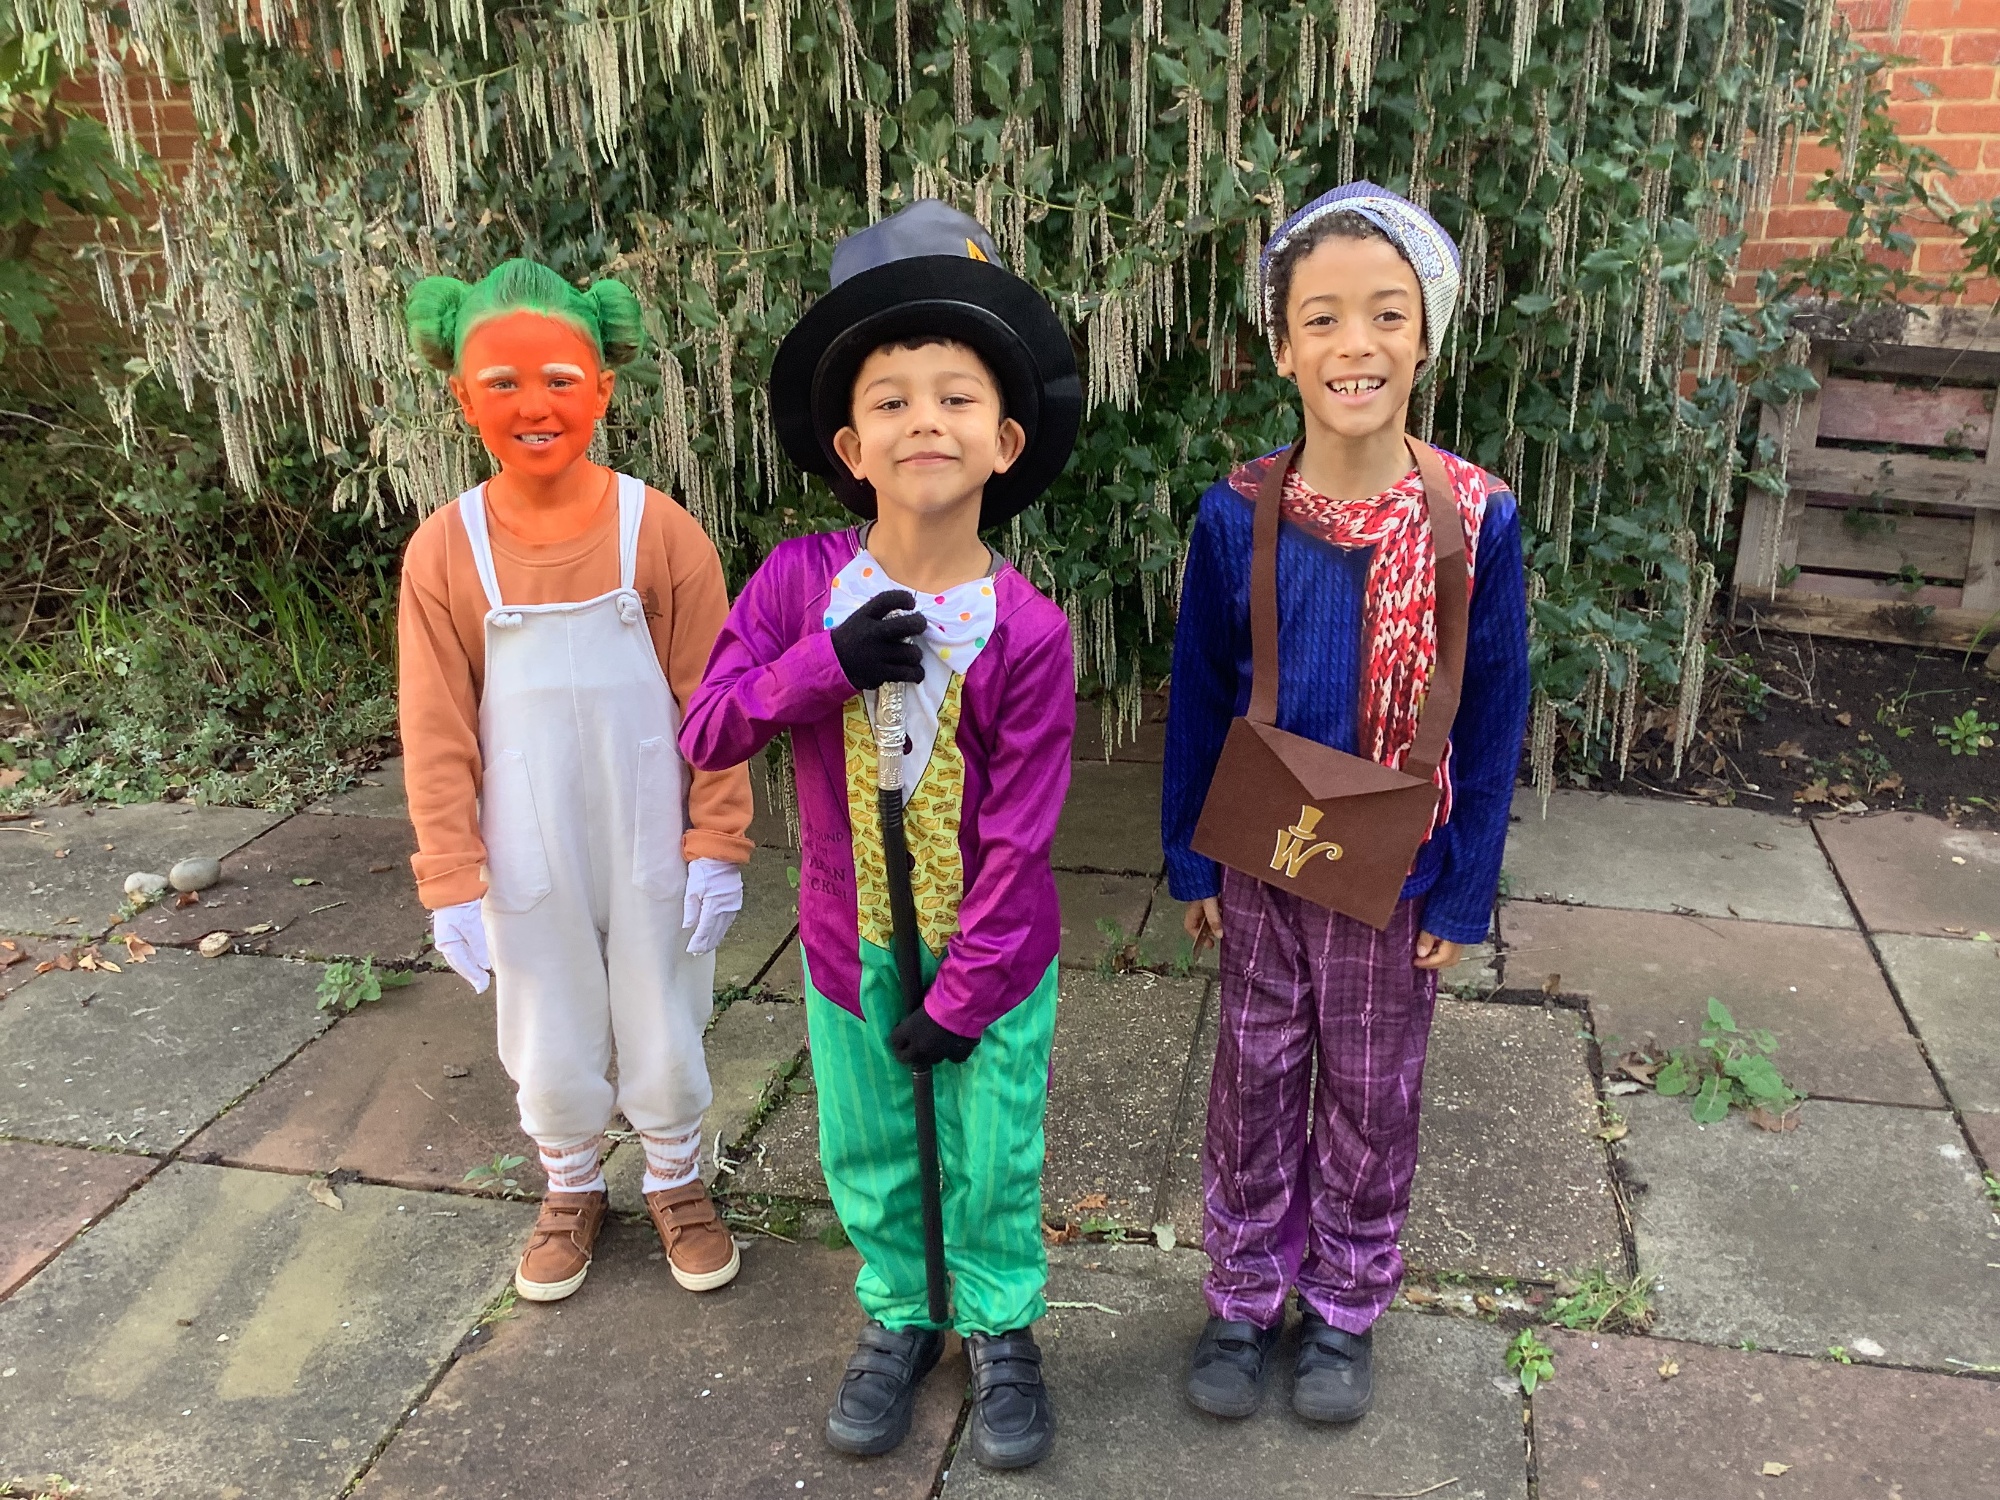 Children dressed as characters from Charlie and the chocolate factory for World Book Day